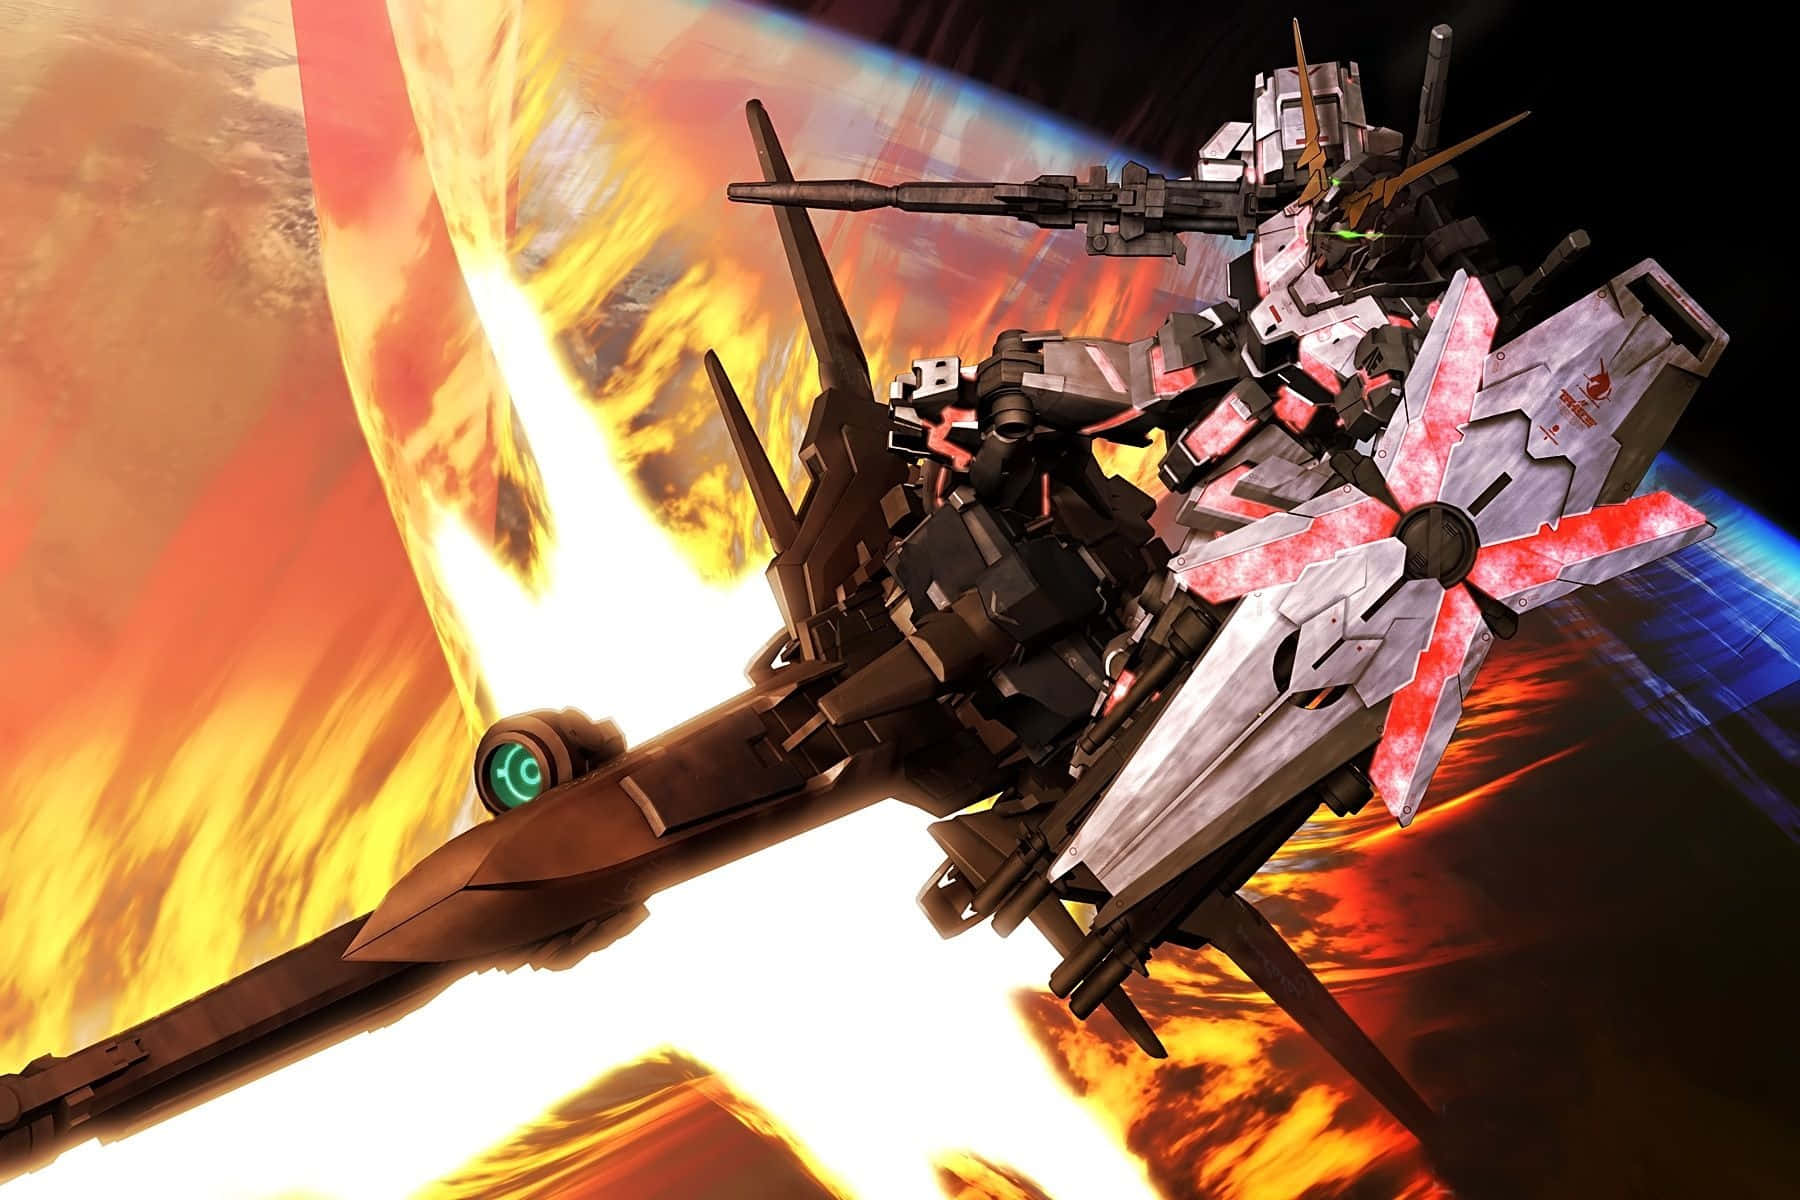 "The Future of Mobile Suit Fighting is Here. Welcome to the Gundam Universe." Wallpaper